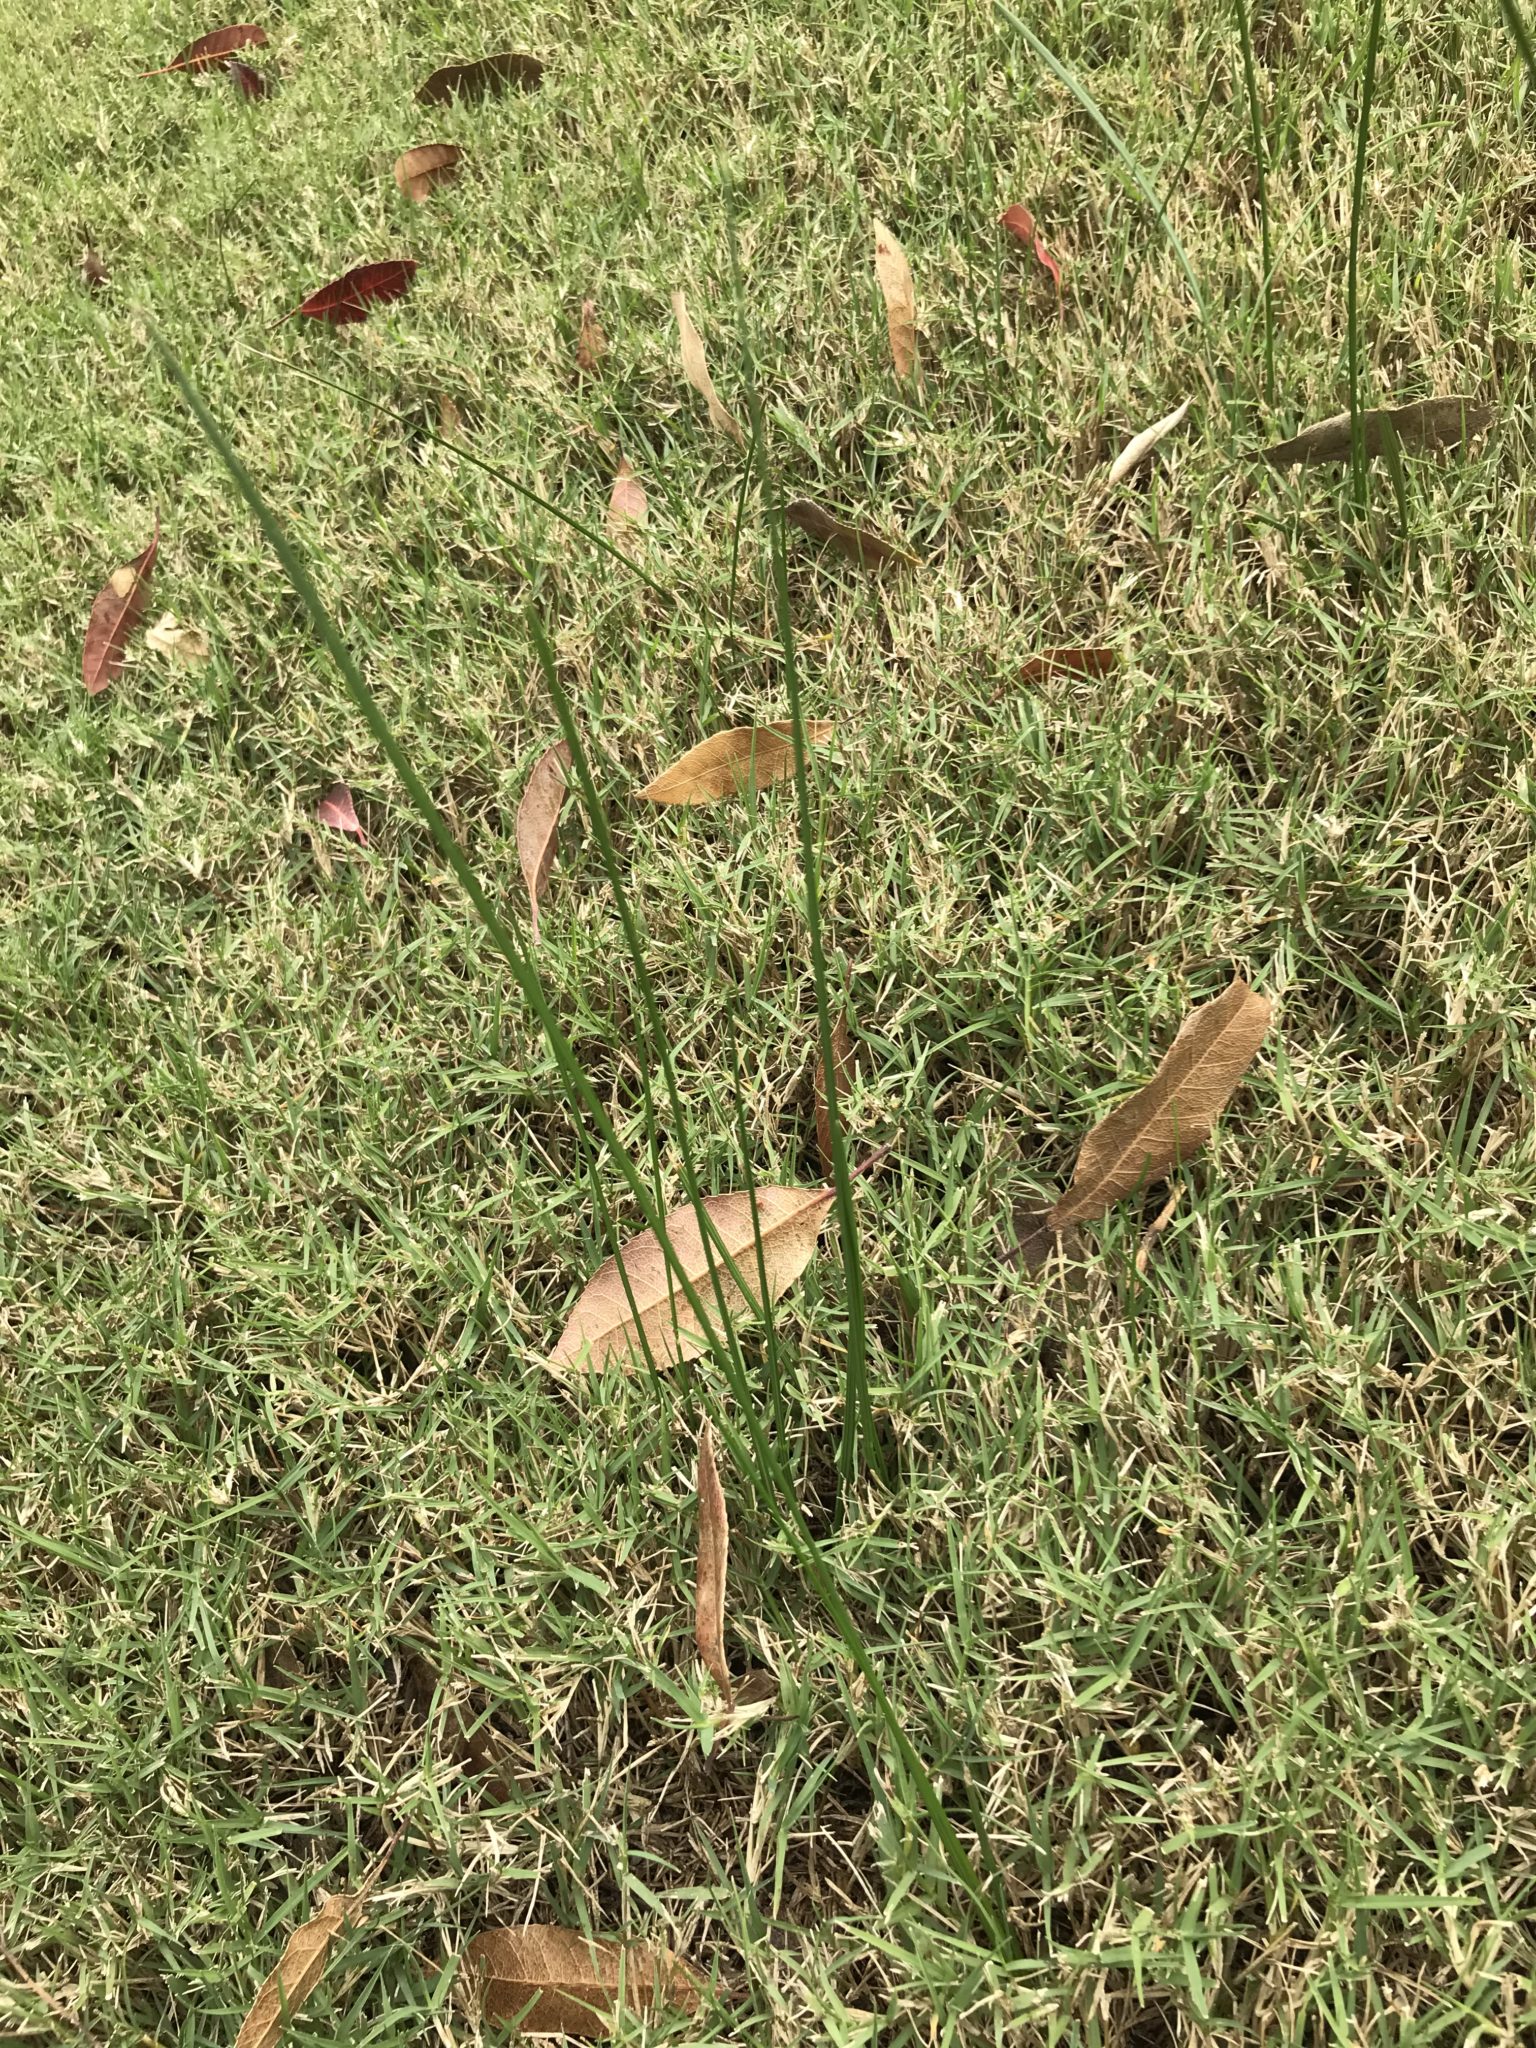 How To Get Rid Of Onion Grass In My Lawn